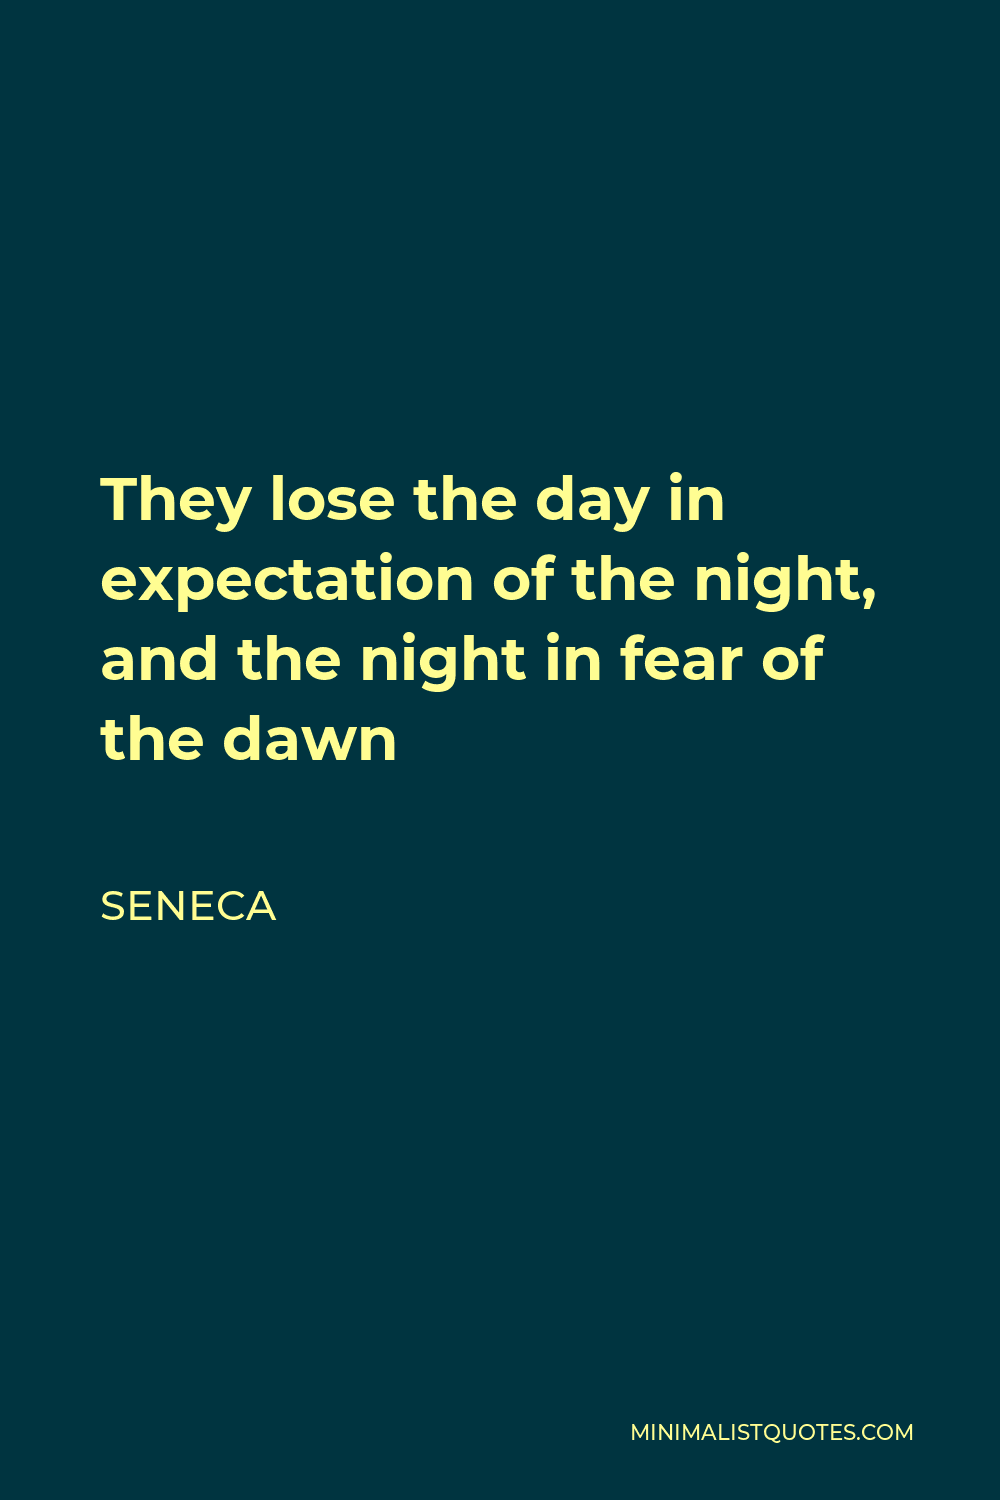 Seneca Quote - They lose the day in expectation of the night, and the night in fear of the dawn